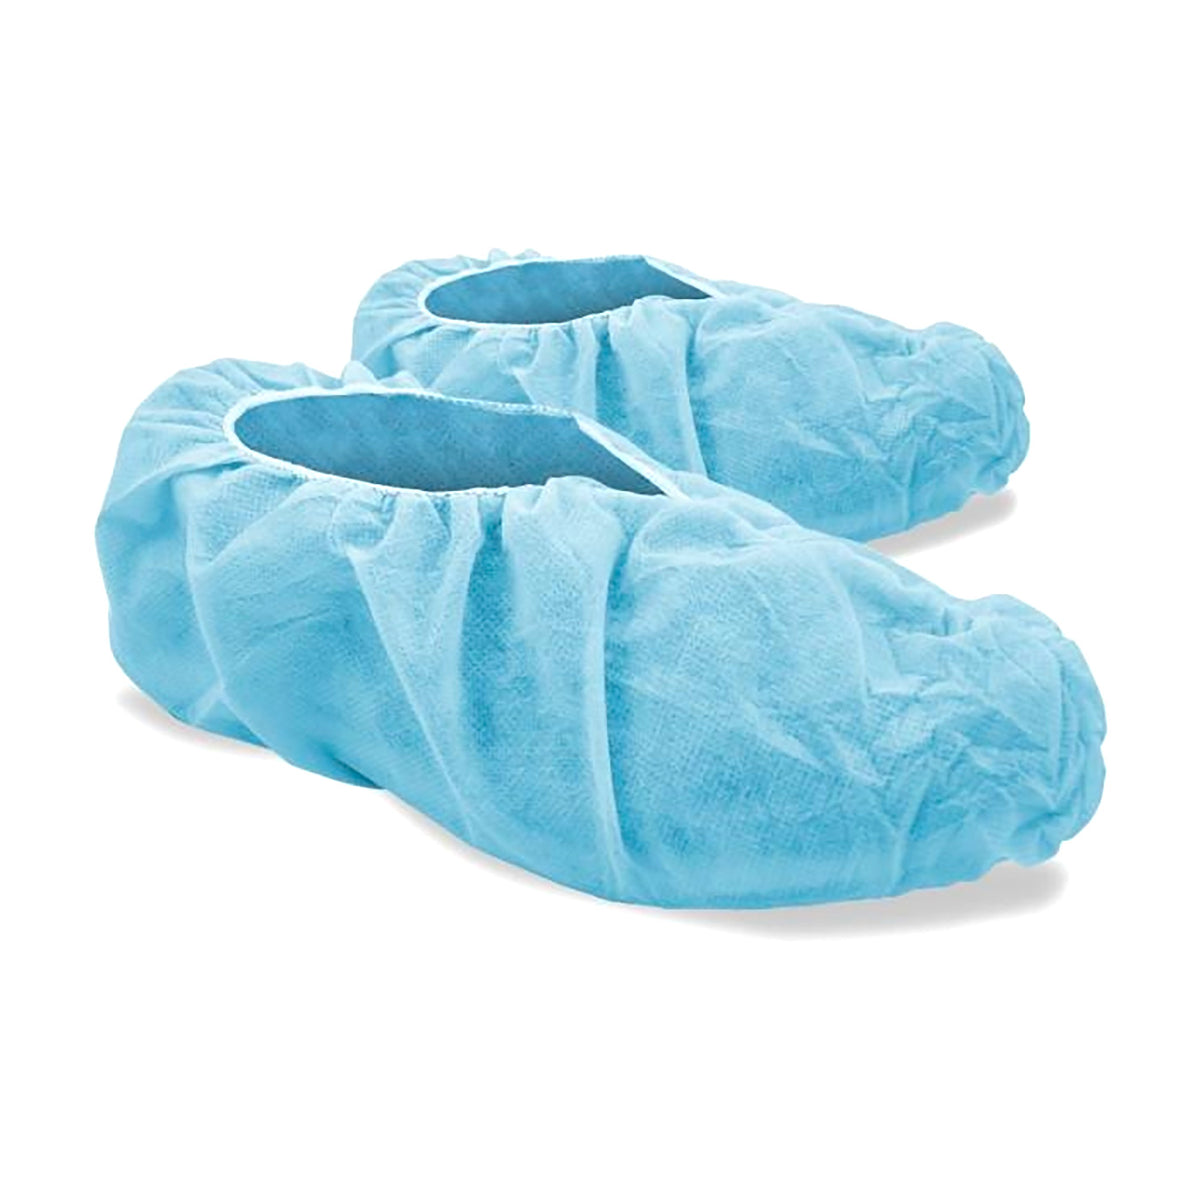 Yuleys SEBS Reusable Safety Shoe Covers YxxBLU – Medical Supplies